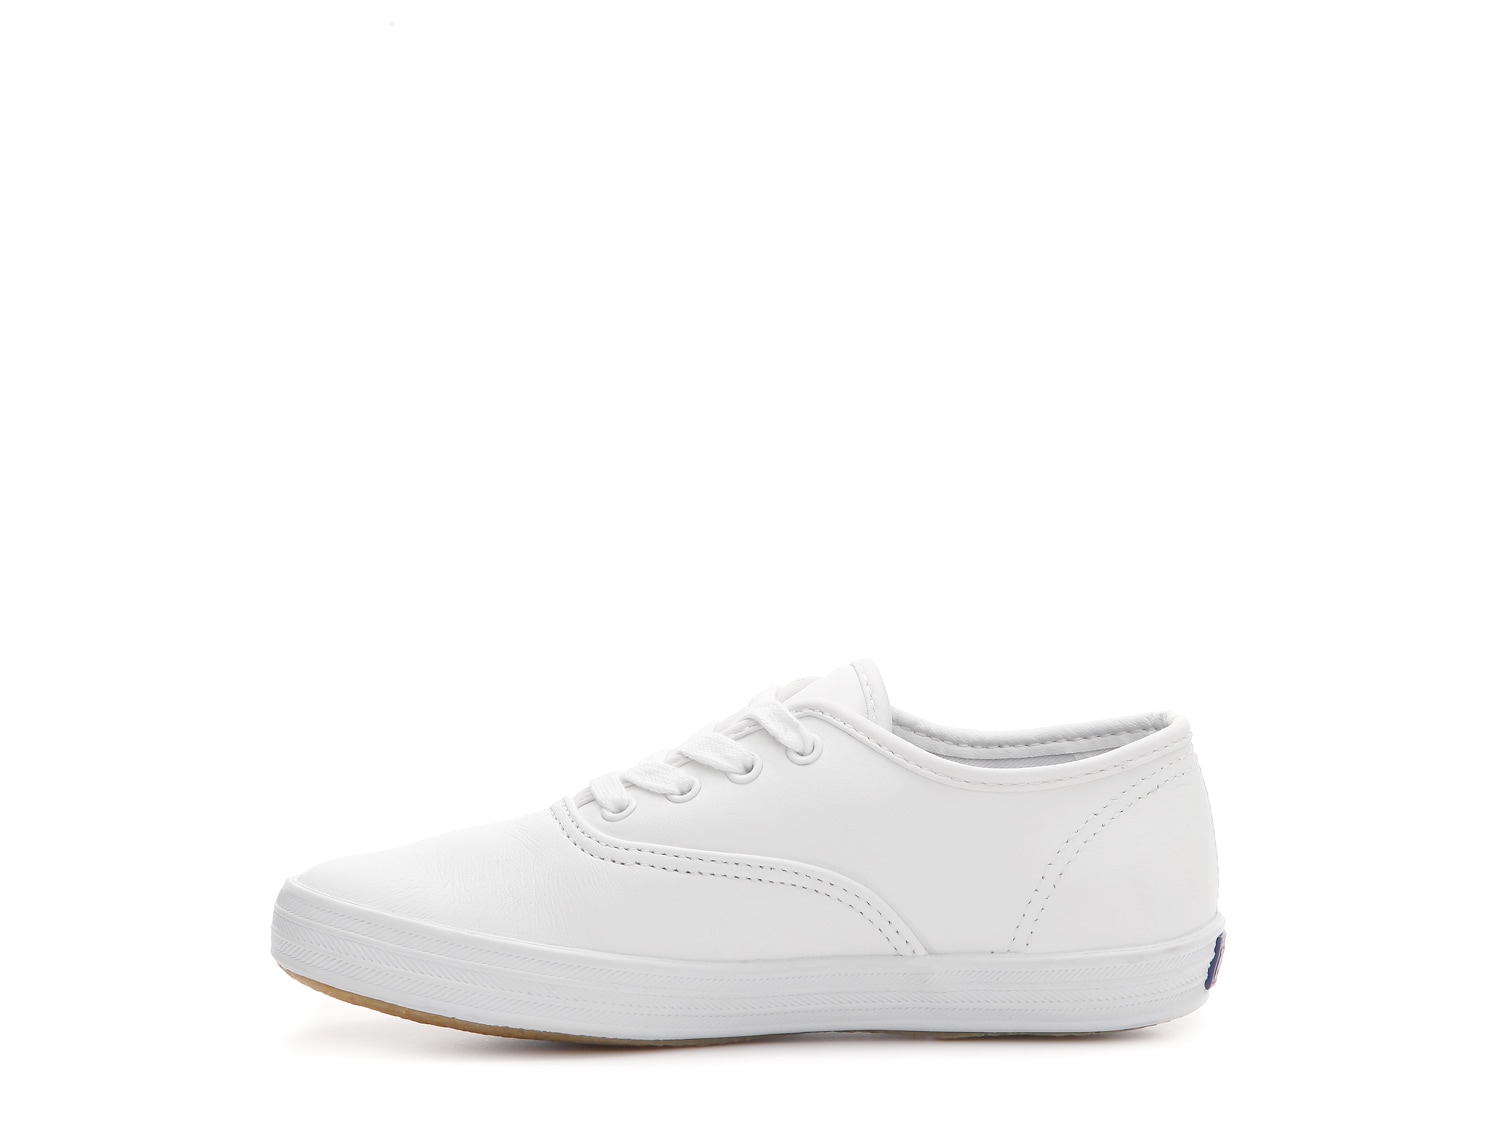 Keds Champion Youth Leather Sneaker | DSW